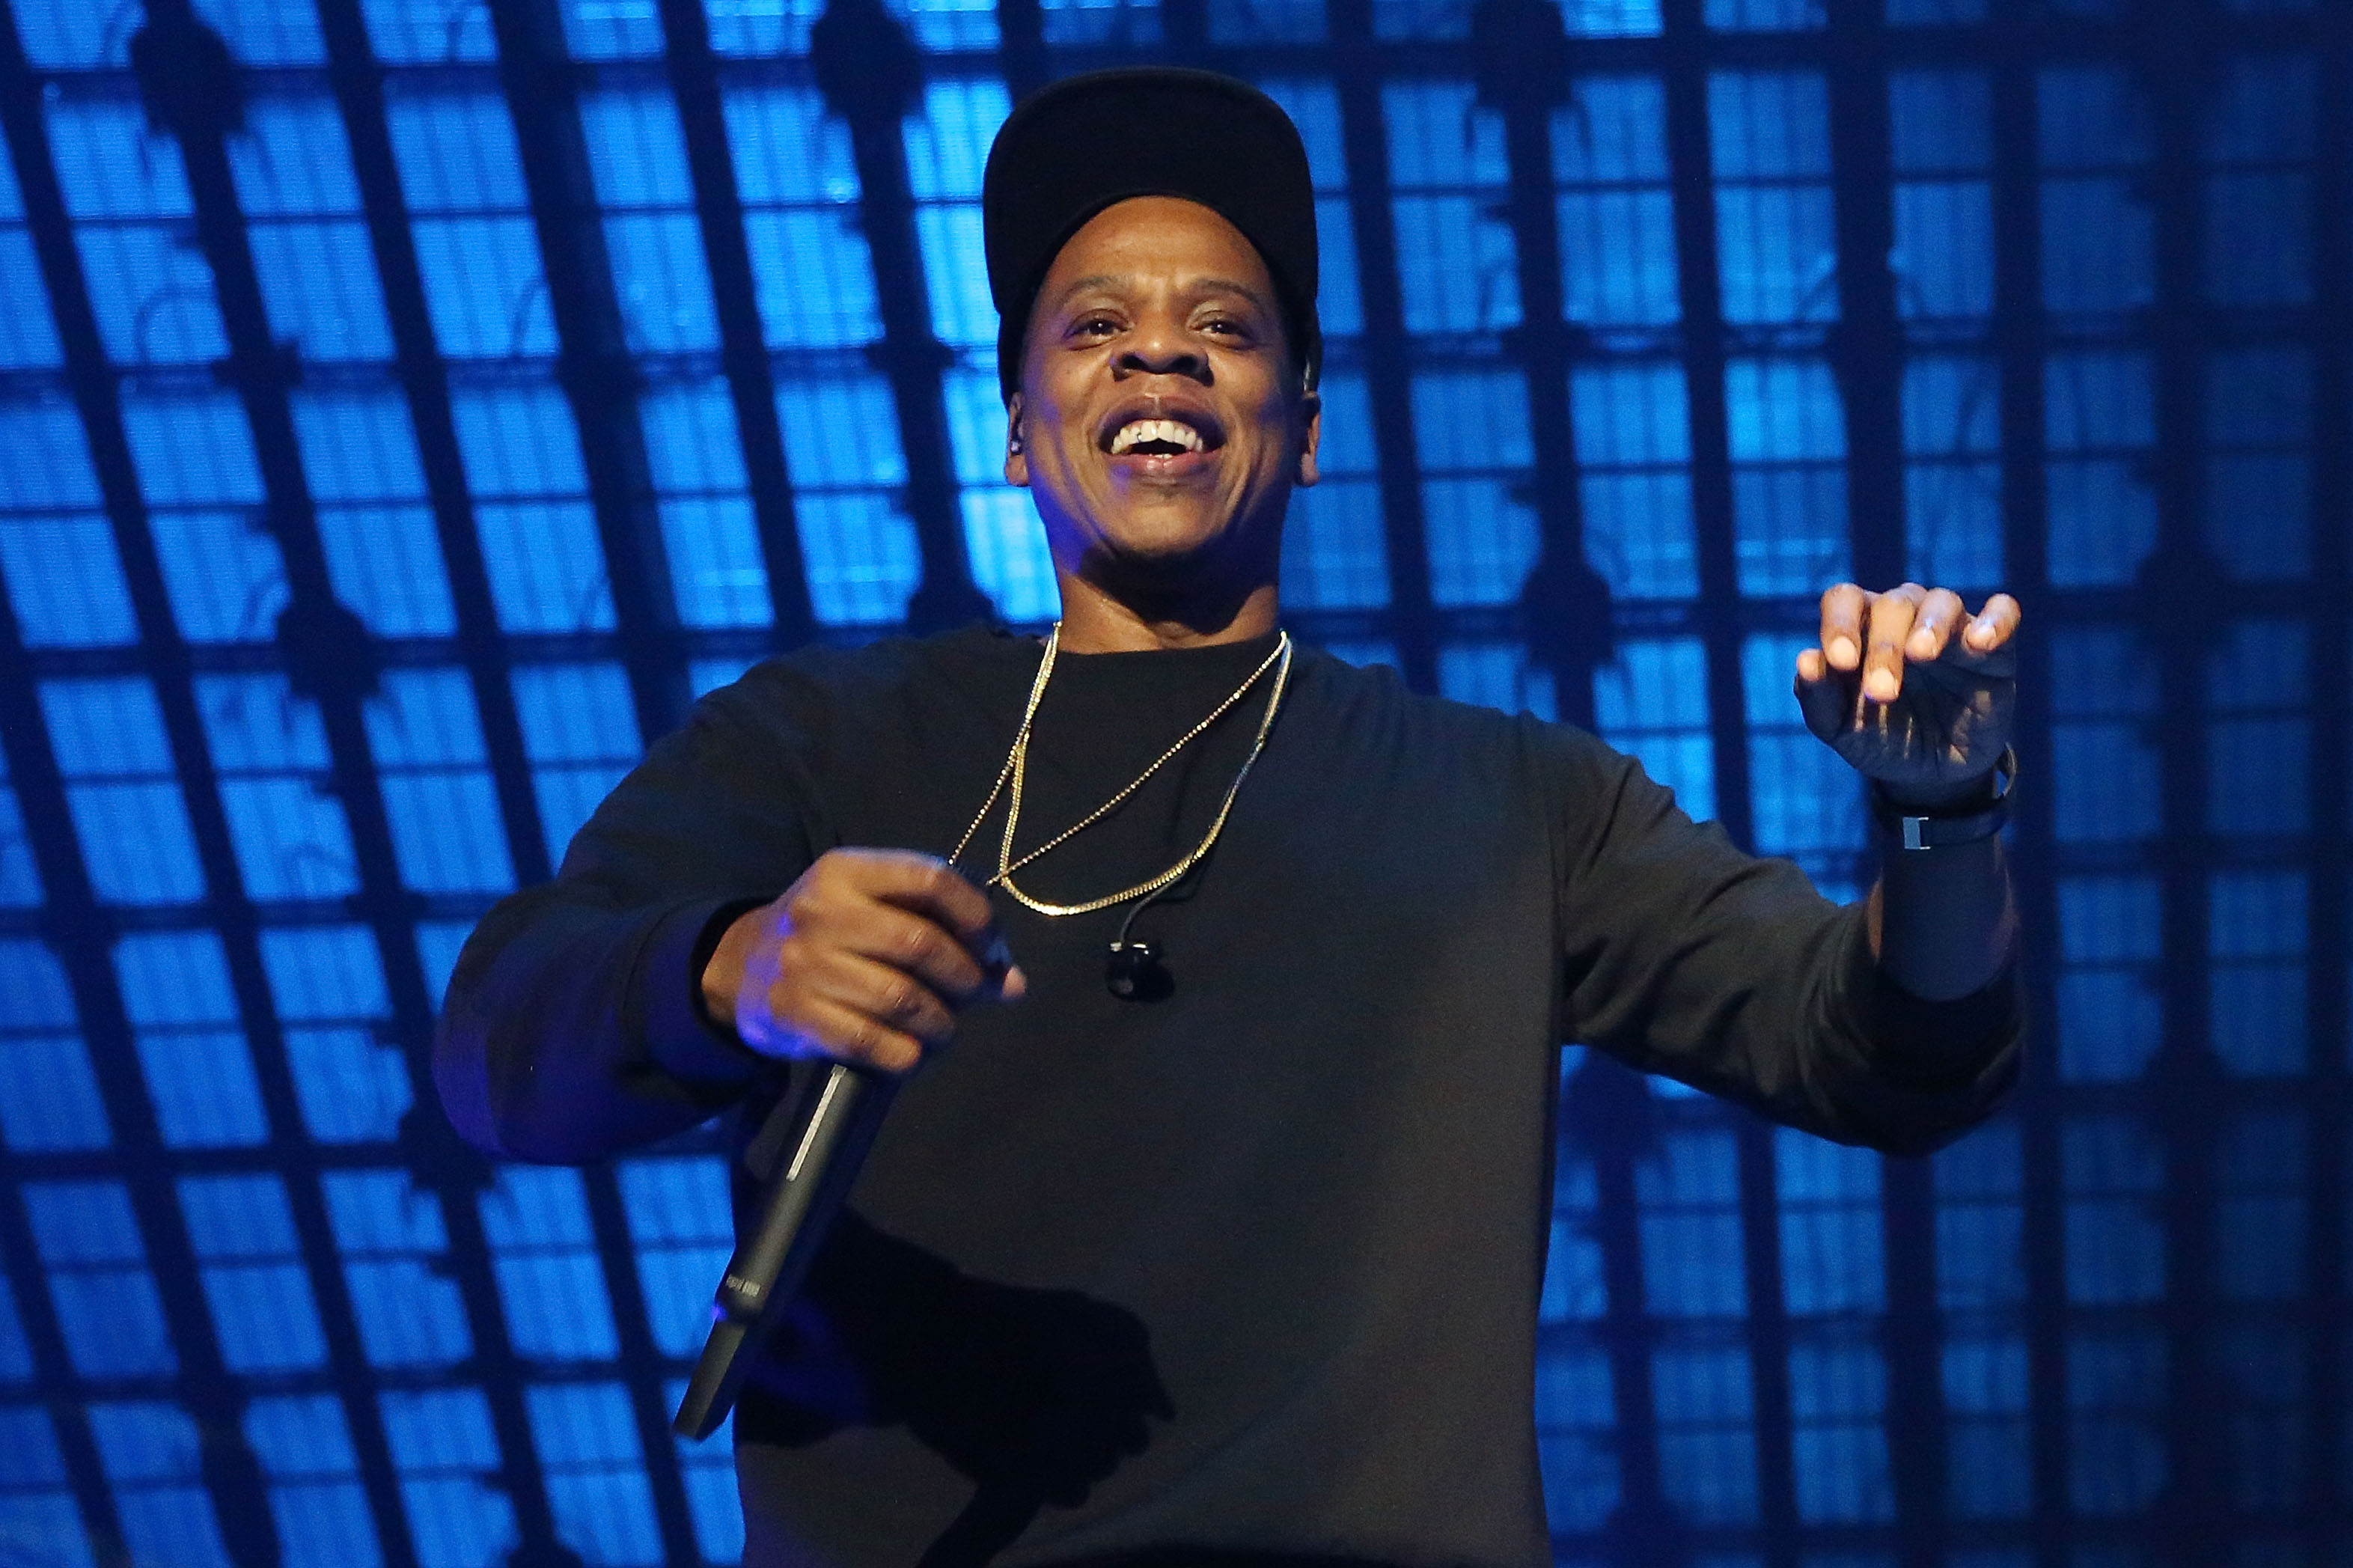 Jay Z performs during Tidal X: 1020 at Barclays Center on October 20, 2015 in the Brooklyn borough of New York City. (Taylor Hill&mdash;FilmMagic)